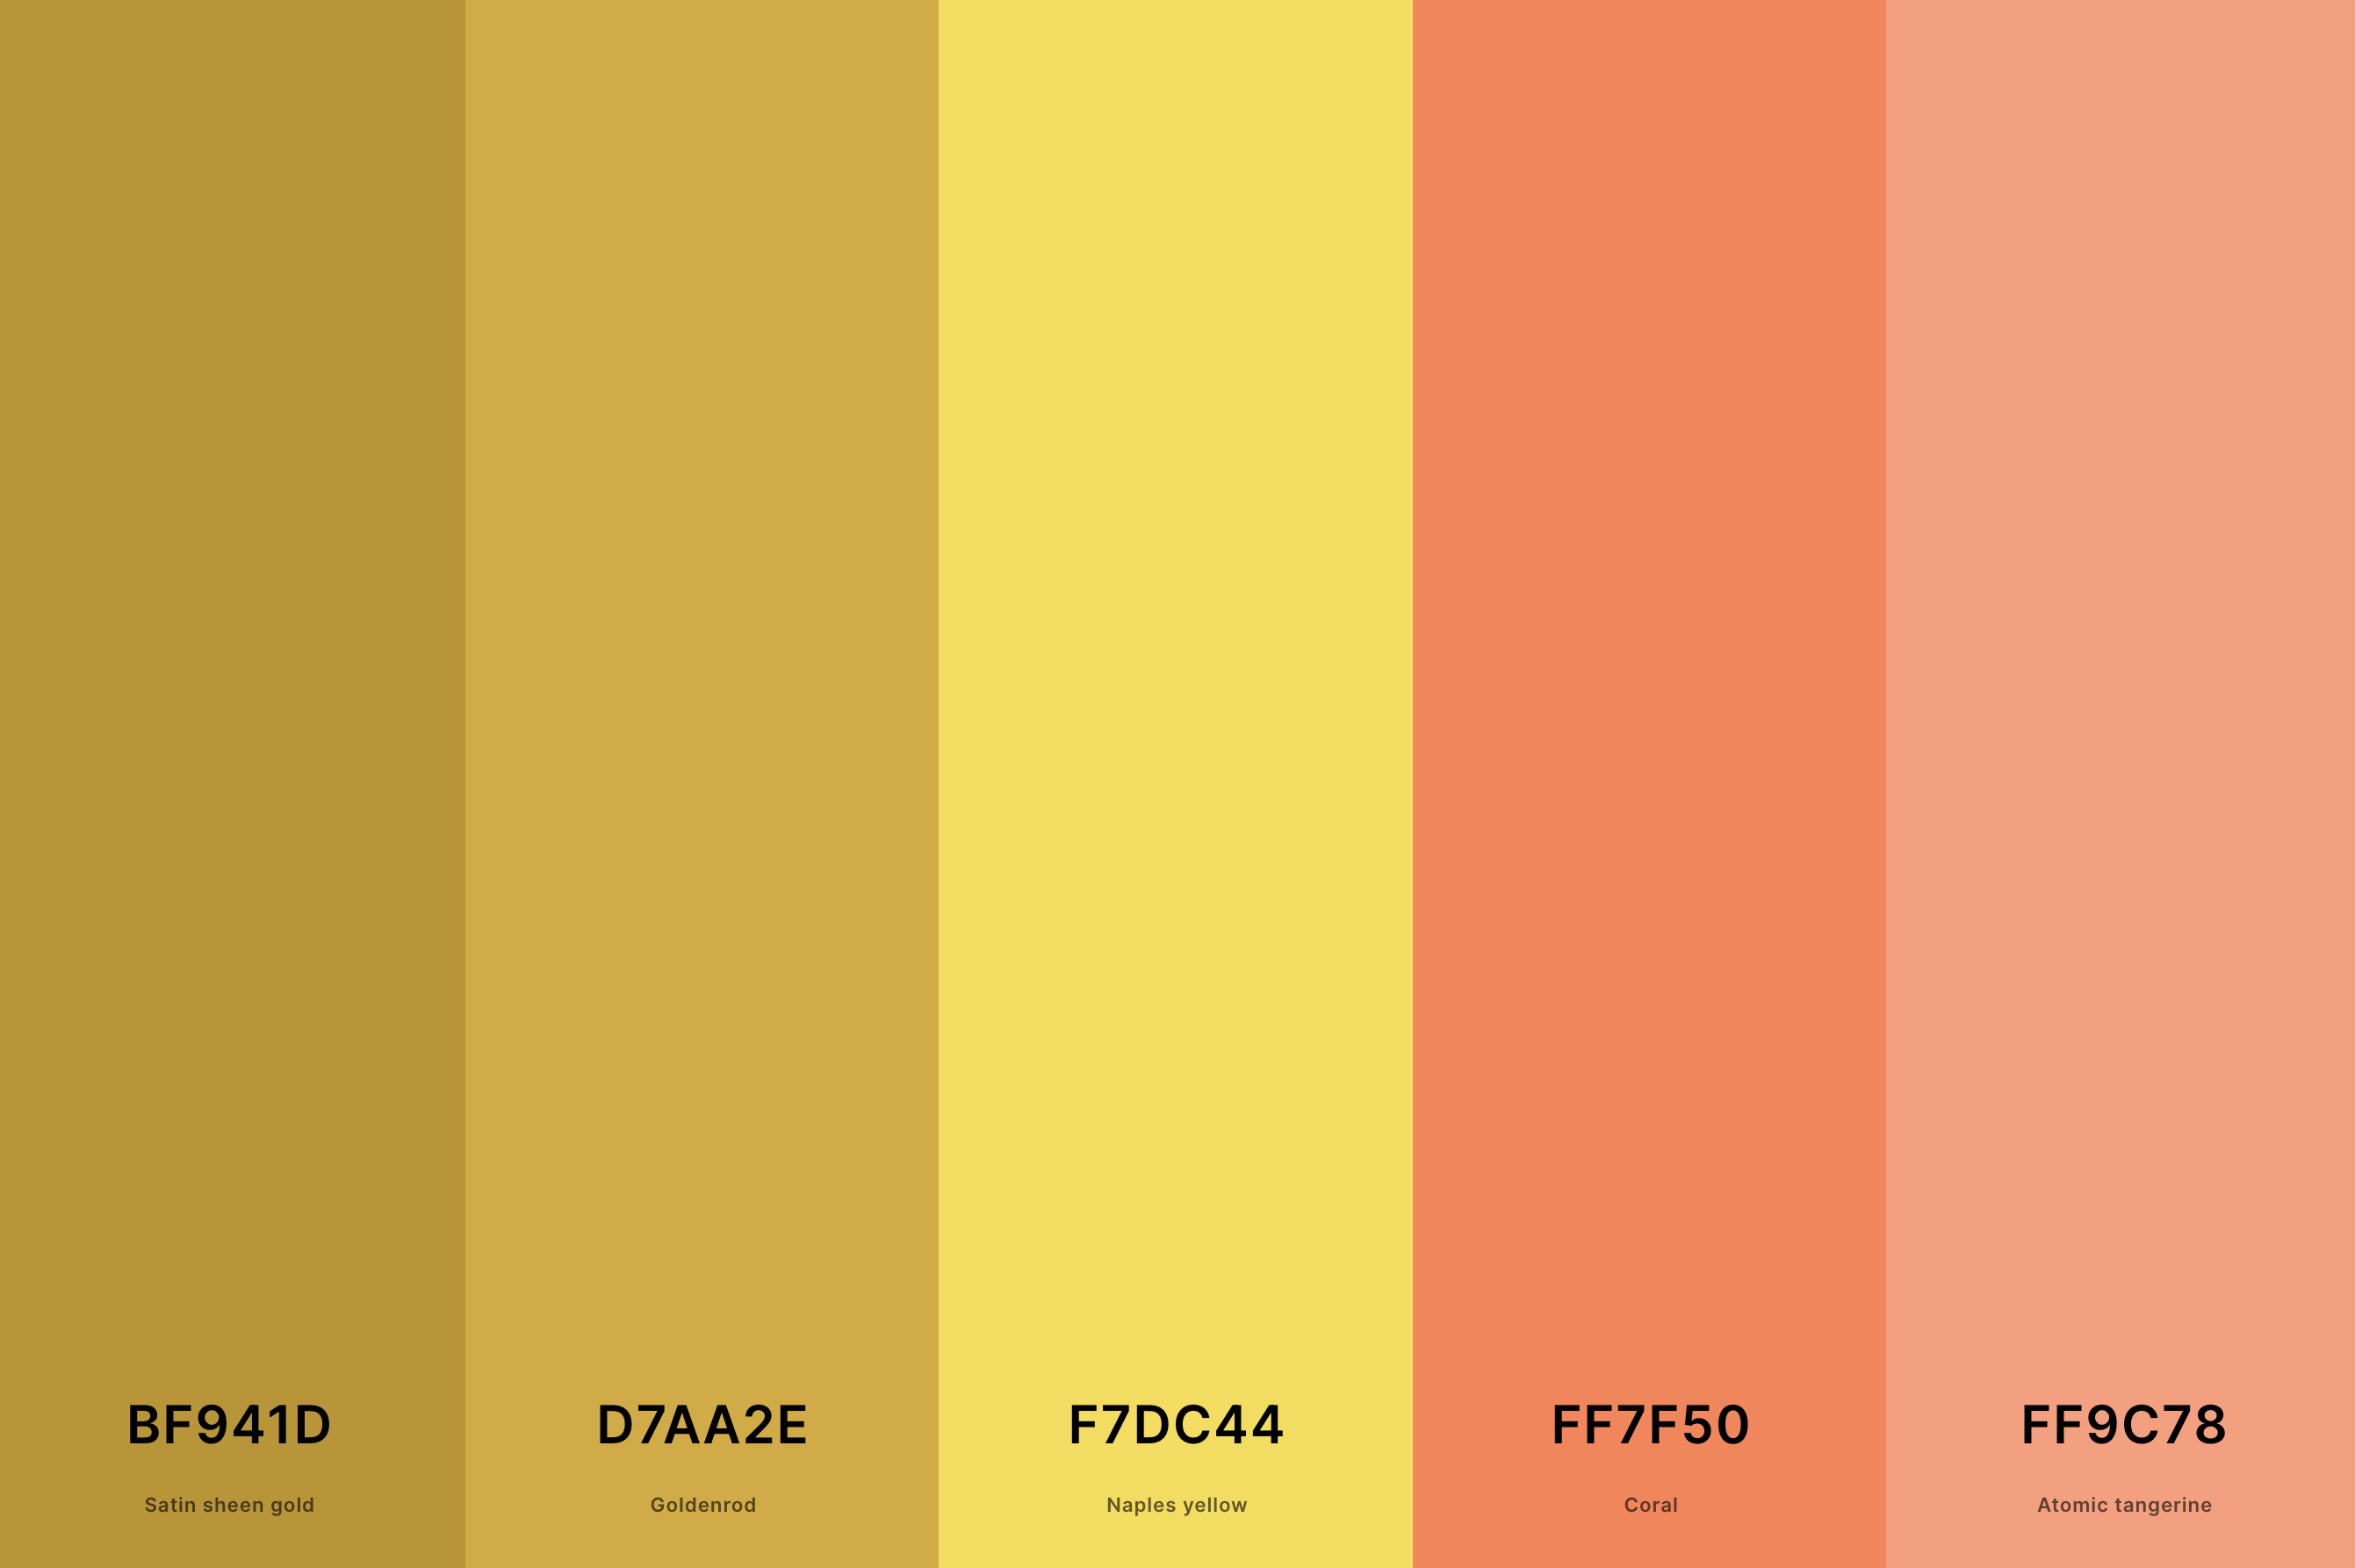 7. Coral And Gold Color Palette Color Palette with Satin Sheen Gold (Hex #BF941D) + Goldenrod (Hex #D7AA2E) + Naples Yellow (Hex #F7DC44) + Coral (Hex #FF7F50) + Atomic Tangerine (Hex #FF9C78) Color Palette with Hex Codes